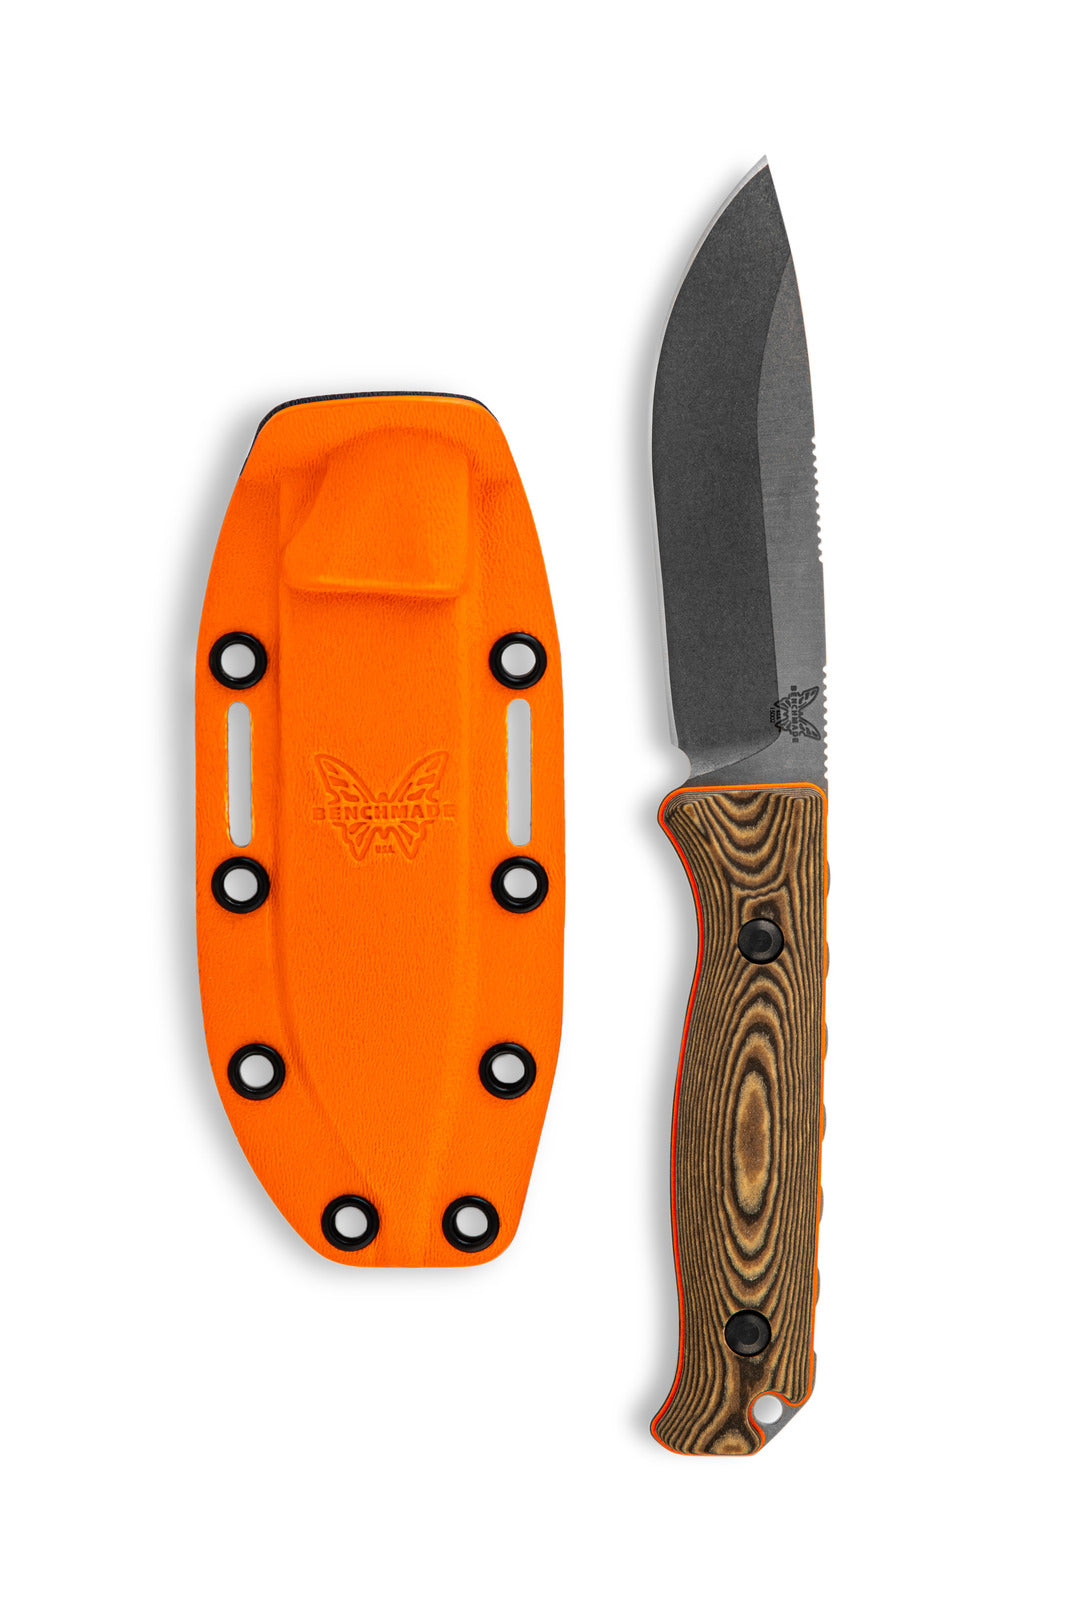 Benchmade 15002-1 Saddle Mountain Skinner Knife - Fixed Blade - Richlite Handle - Wander Outdoors